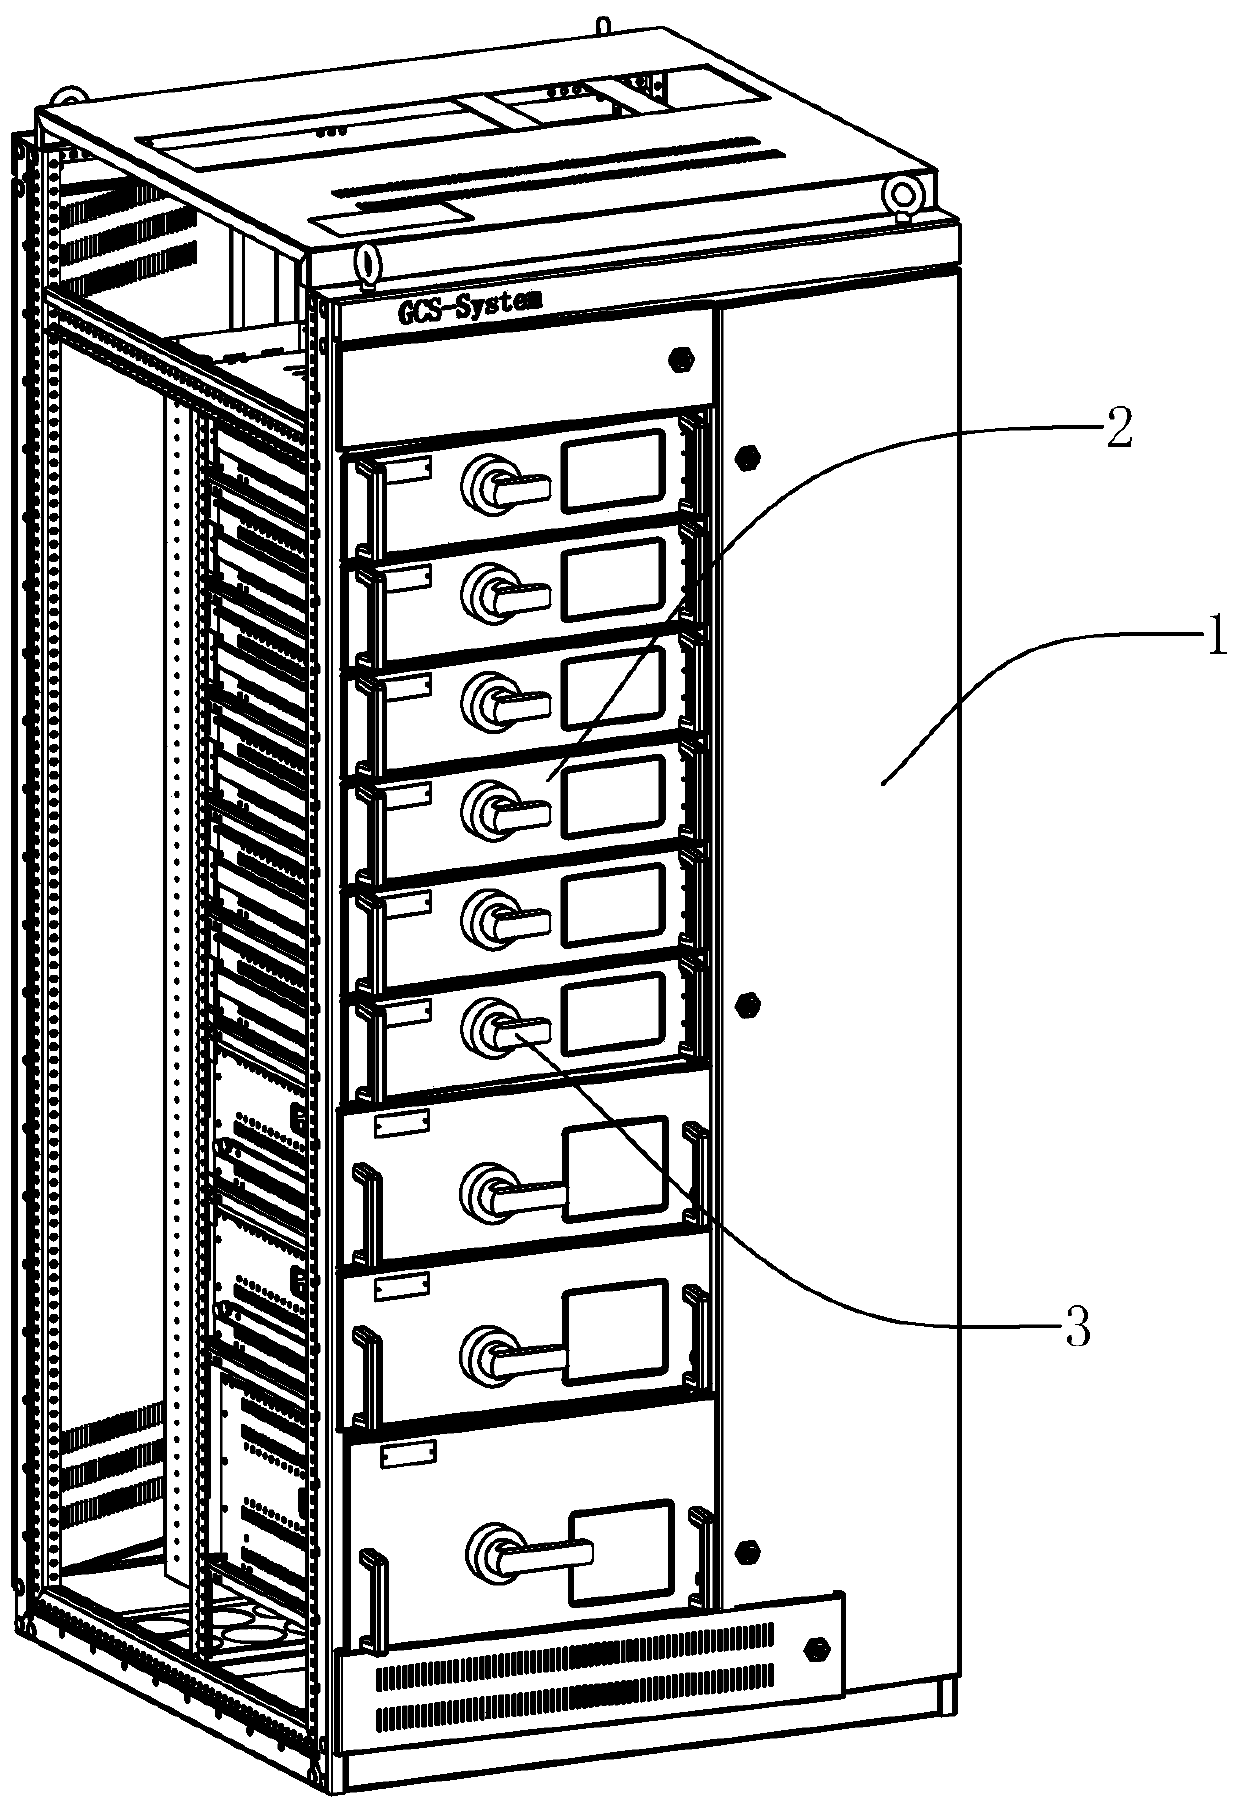 GCS type low-voltage draw-out switch cabinet